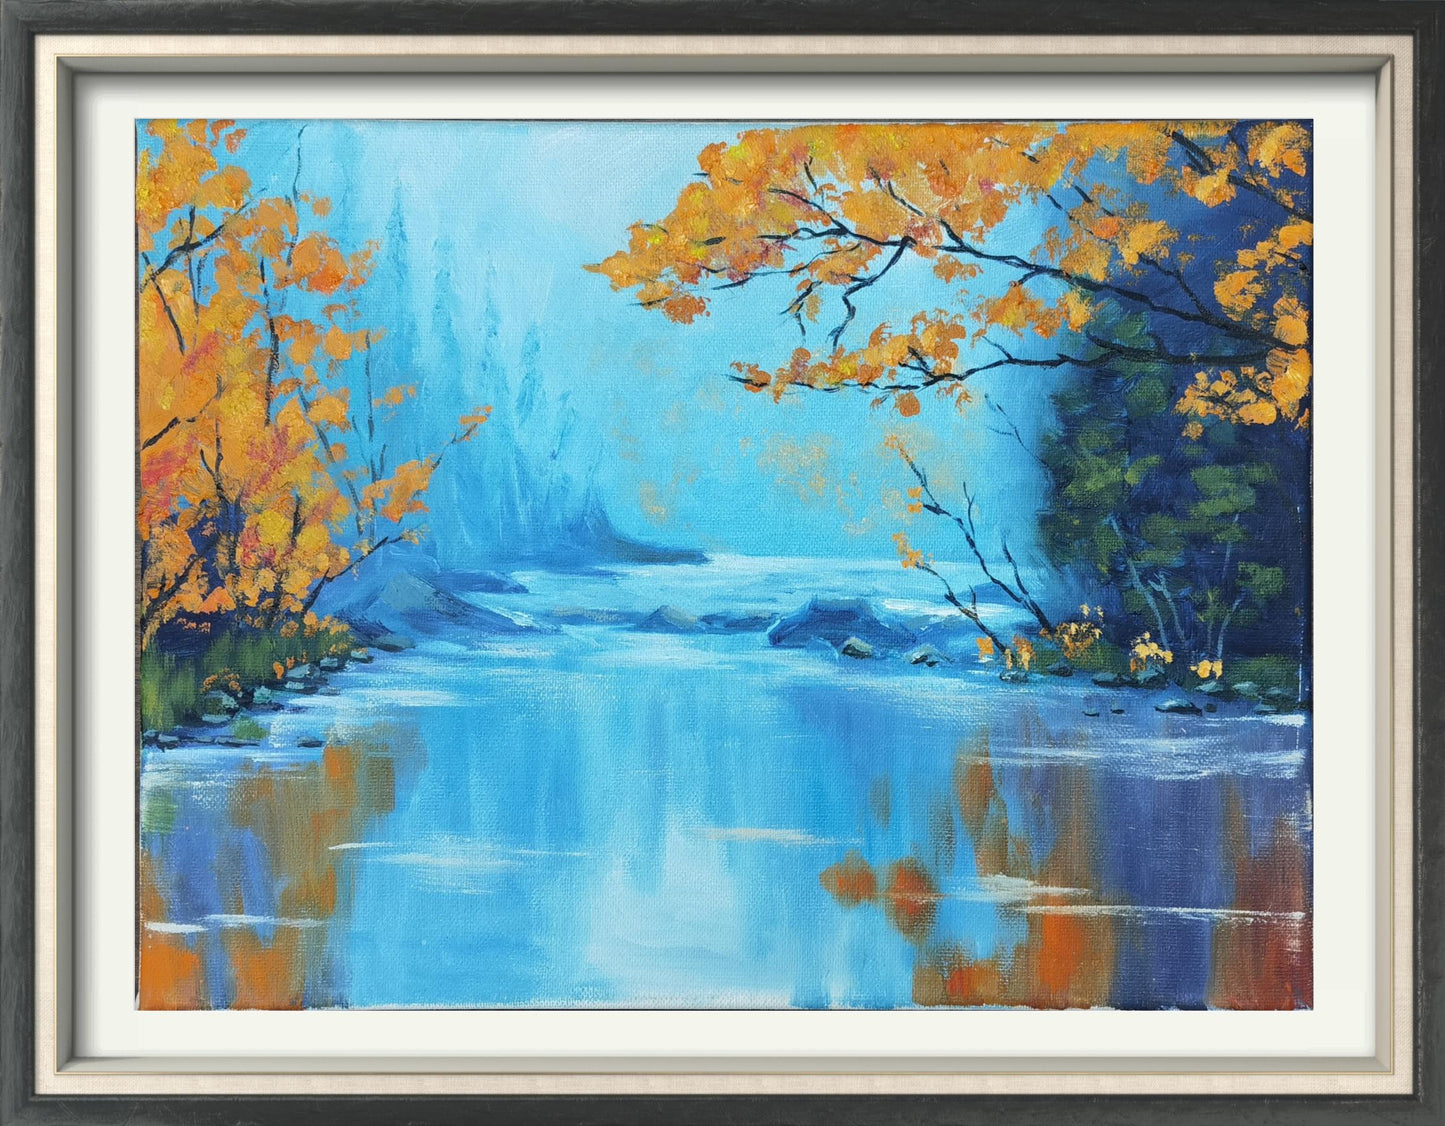 Oil painting-river in the jungle